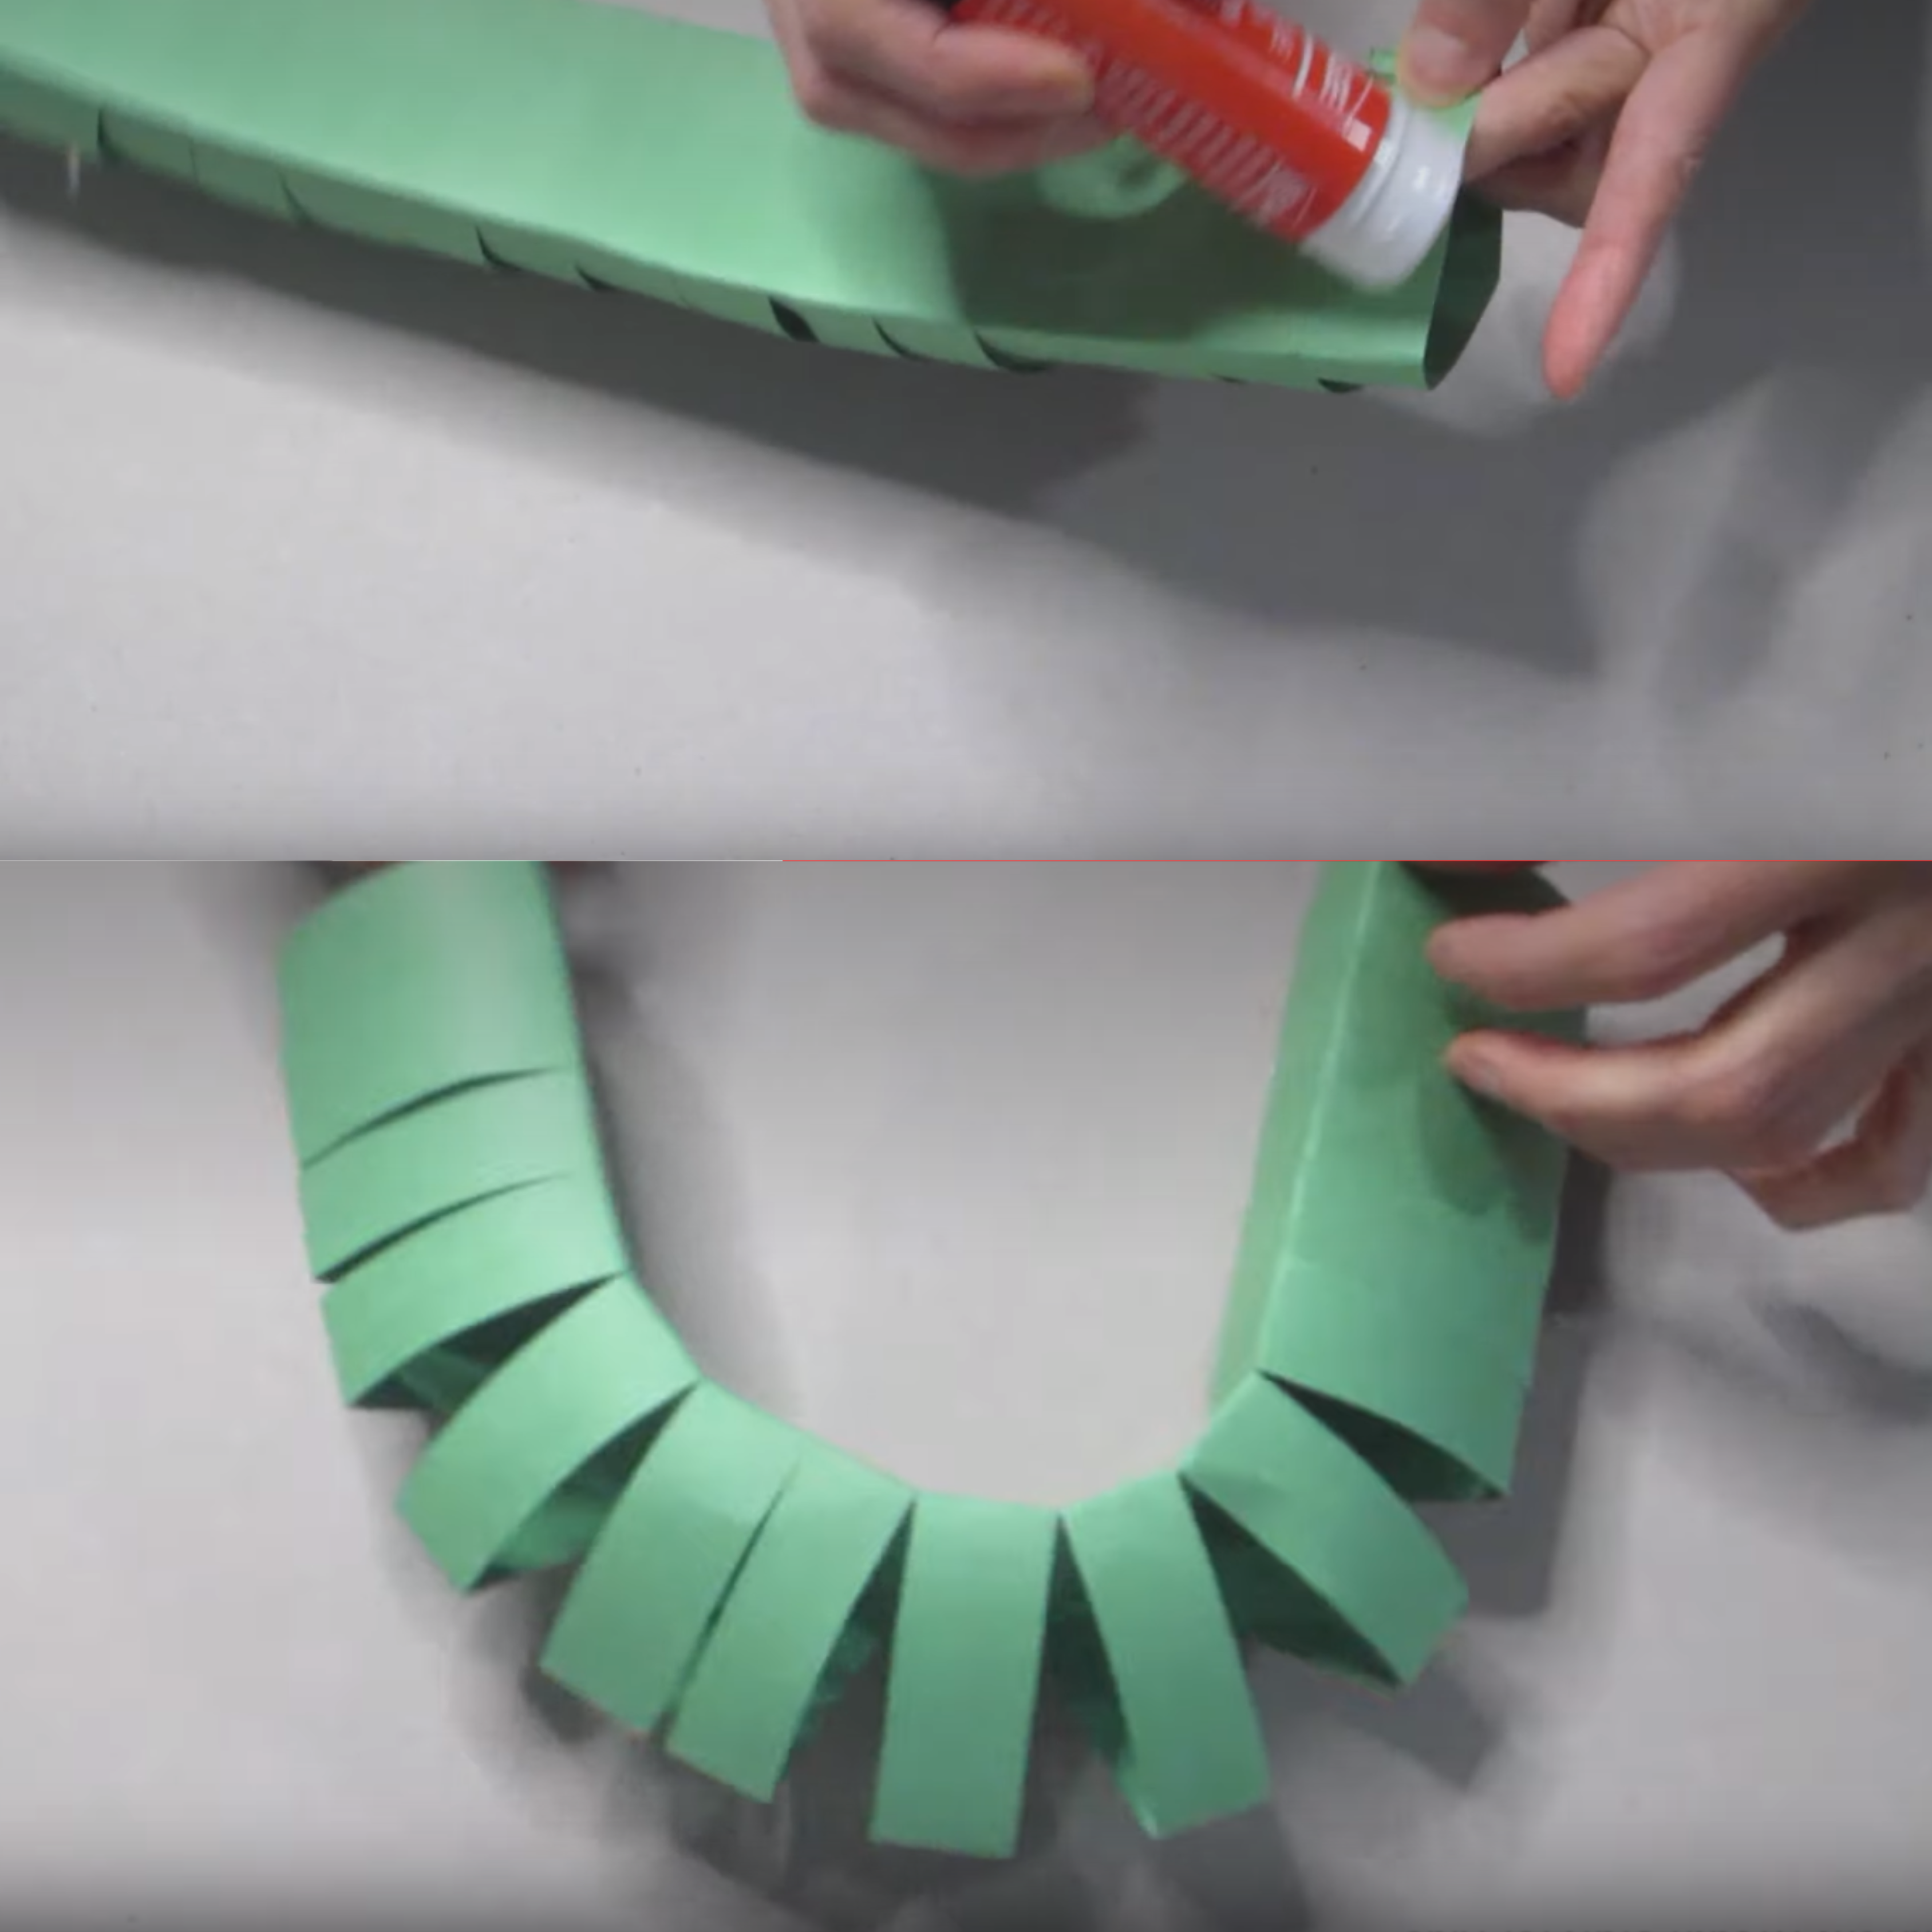 Gluing the sides of the paper